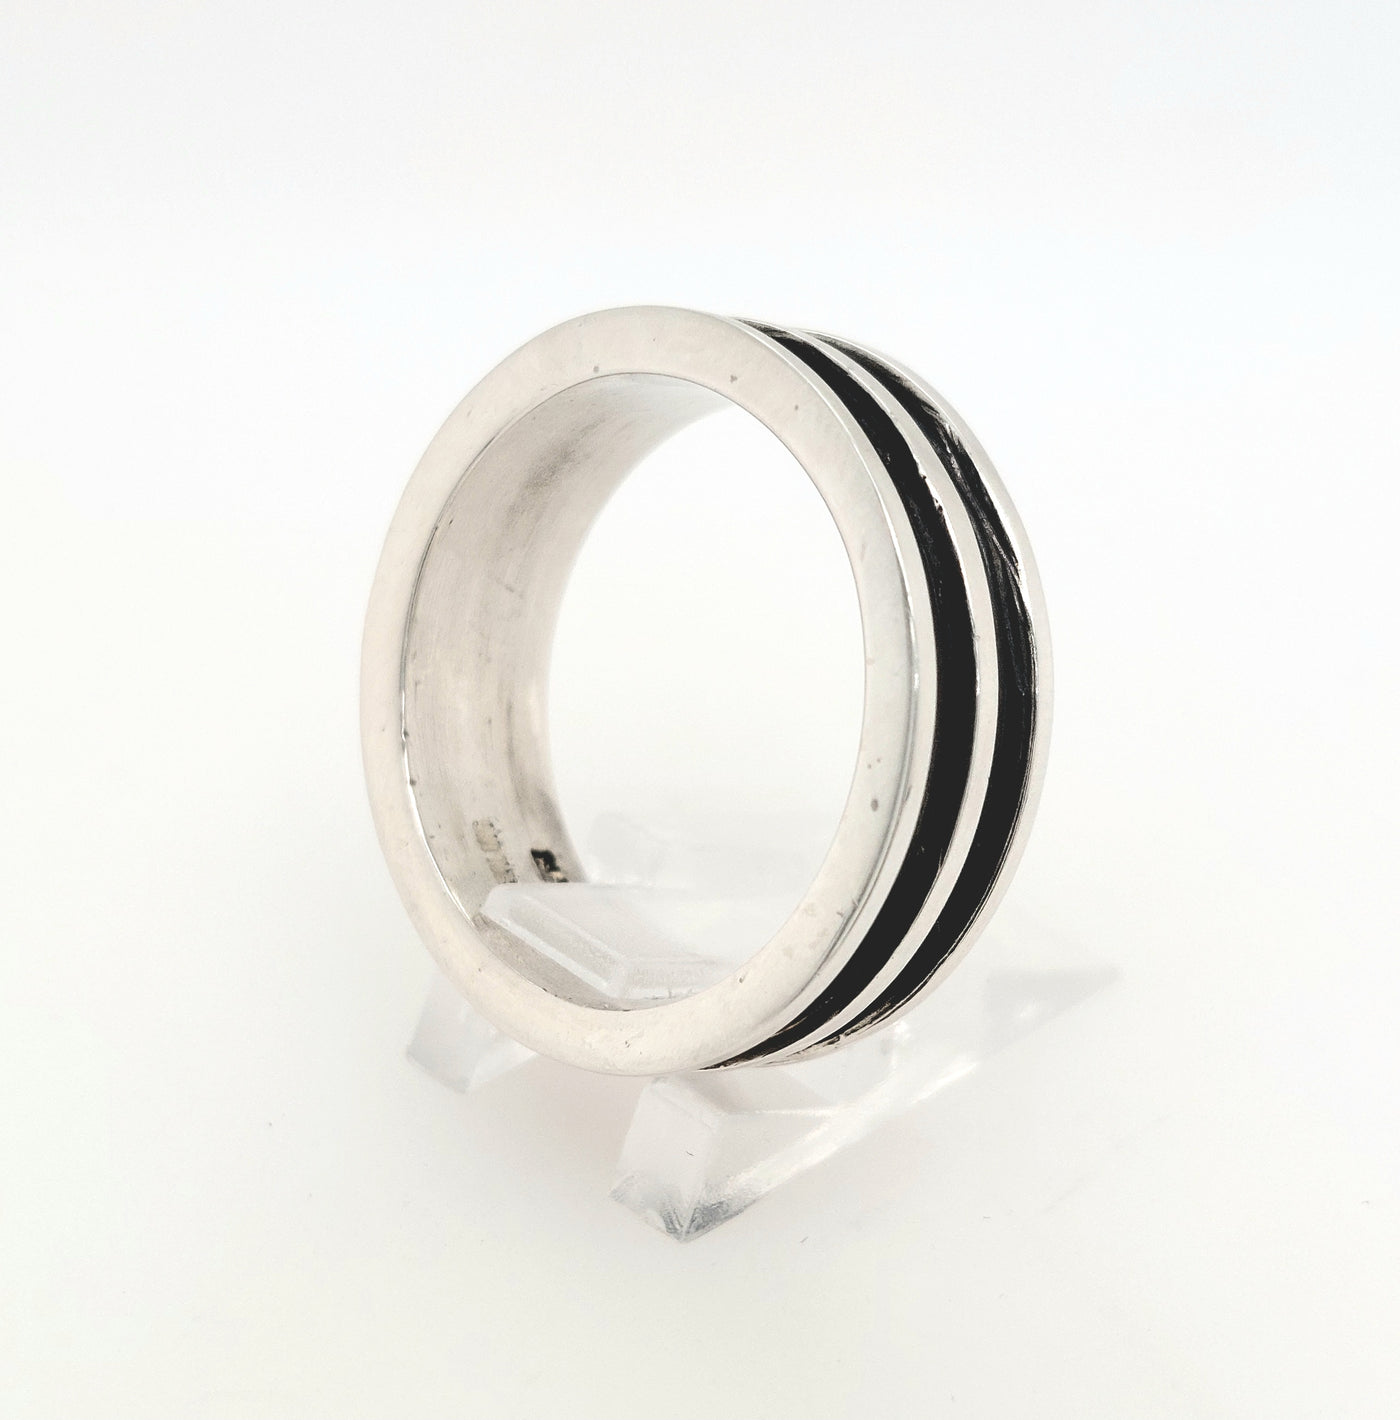 SS Gent's 2-D Grooved Ring Size:10.50